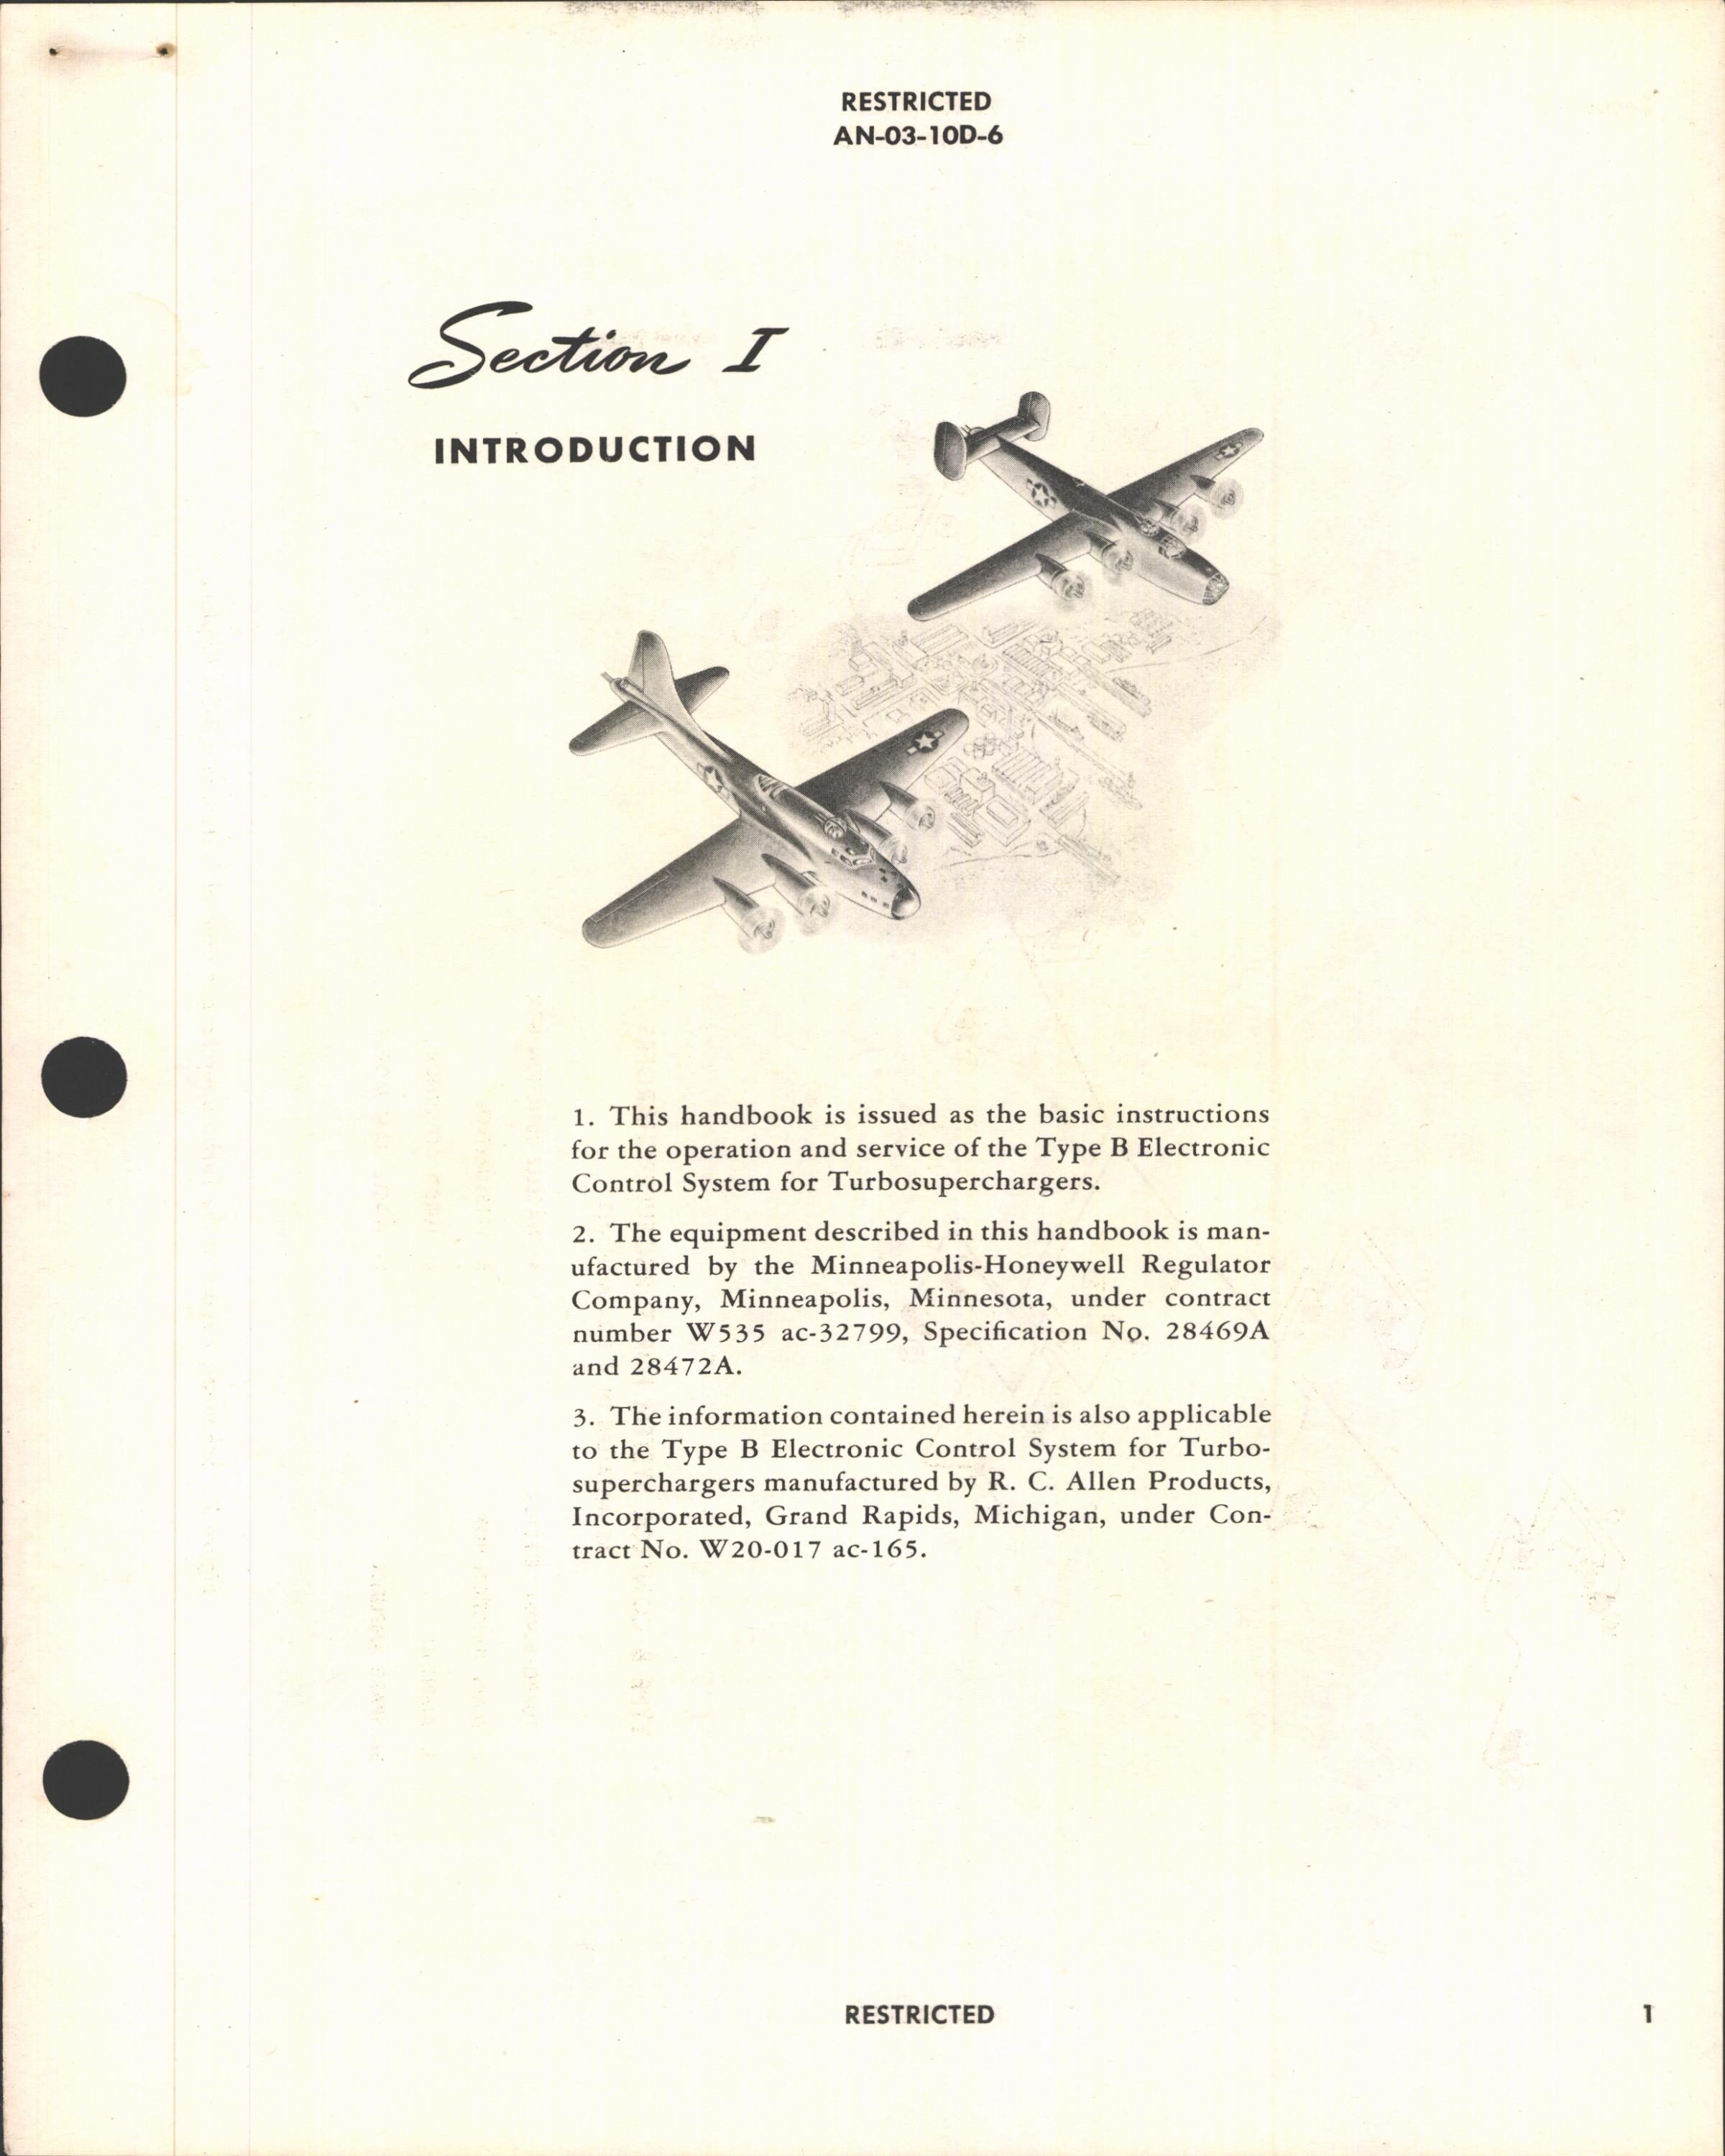 Sample page 5 from AirCorps Library document: Operation & Service Instructions for Type B Electronic Control System for Turbosuperchargers